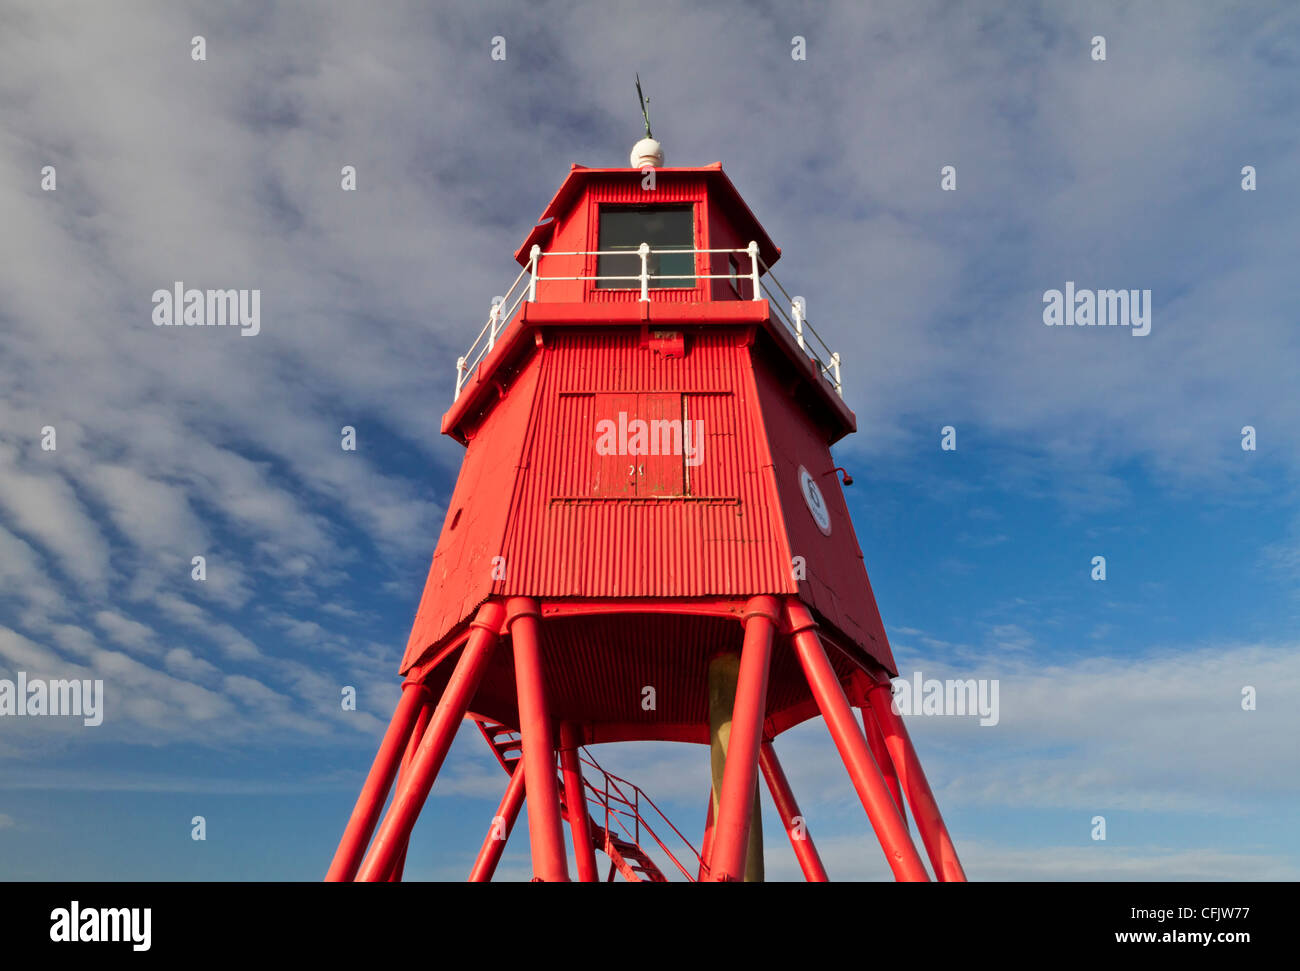 The Herd Groyne Lighthouse near the entrance to the River Tyne at Littlehaven, South Shields, South Tyneside, England Stock Photo